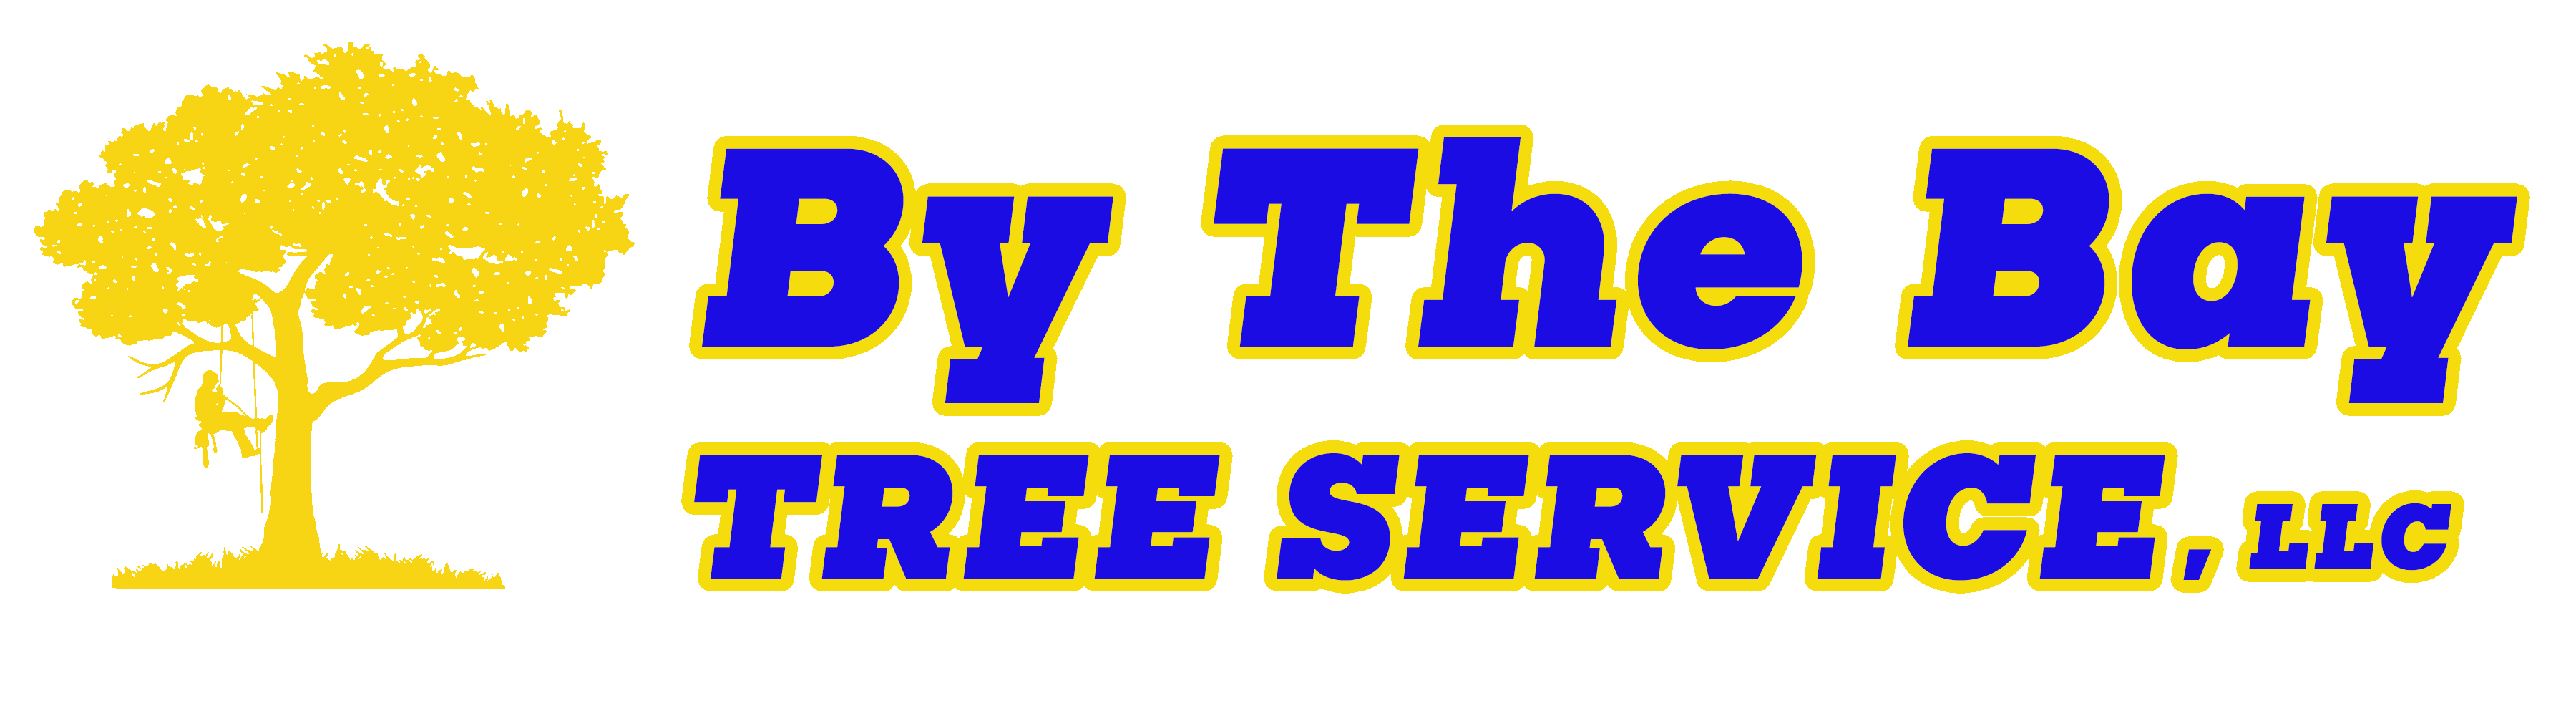 By The Bay Tree Service